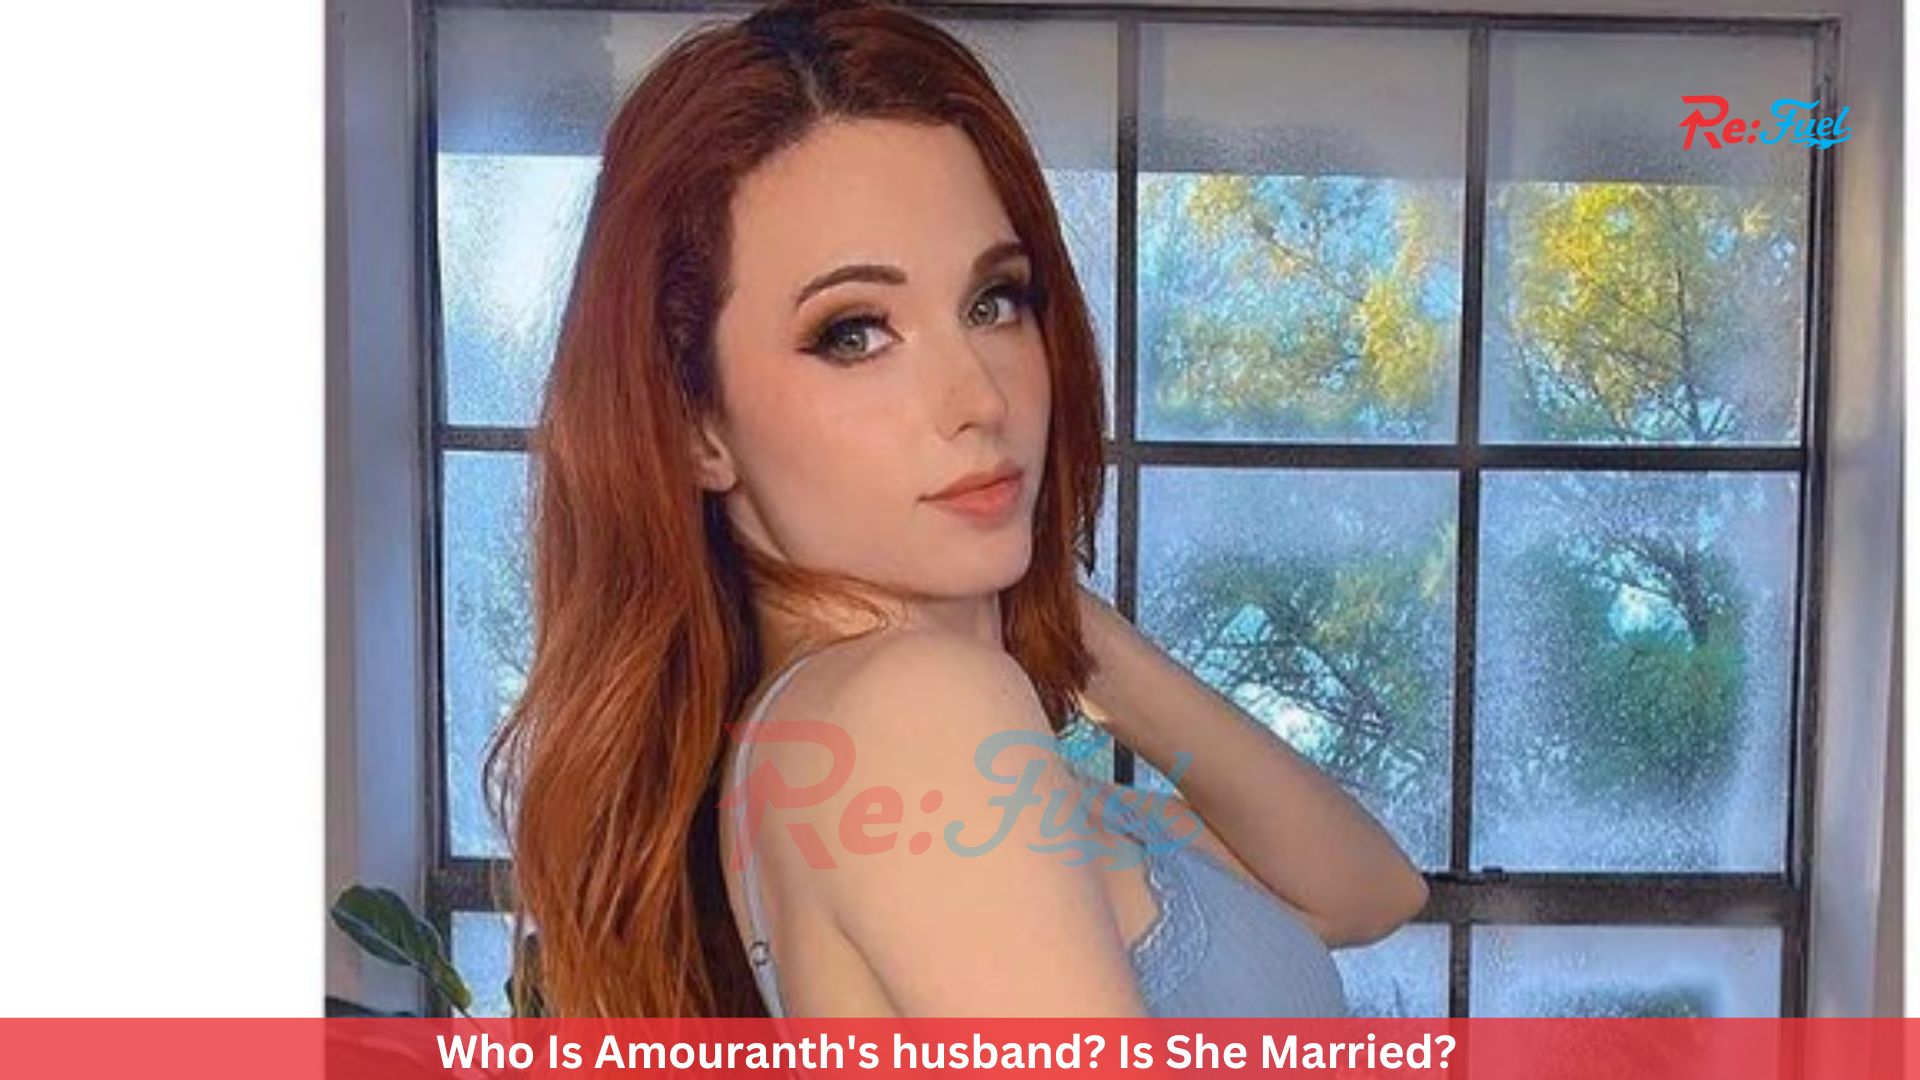 Who Is Amouranth's husband? Is She Married?